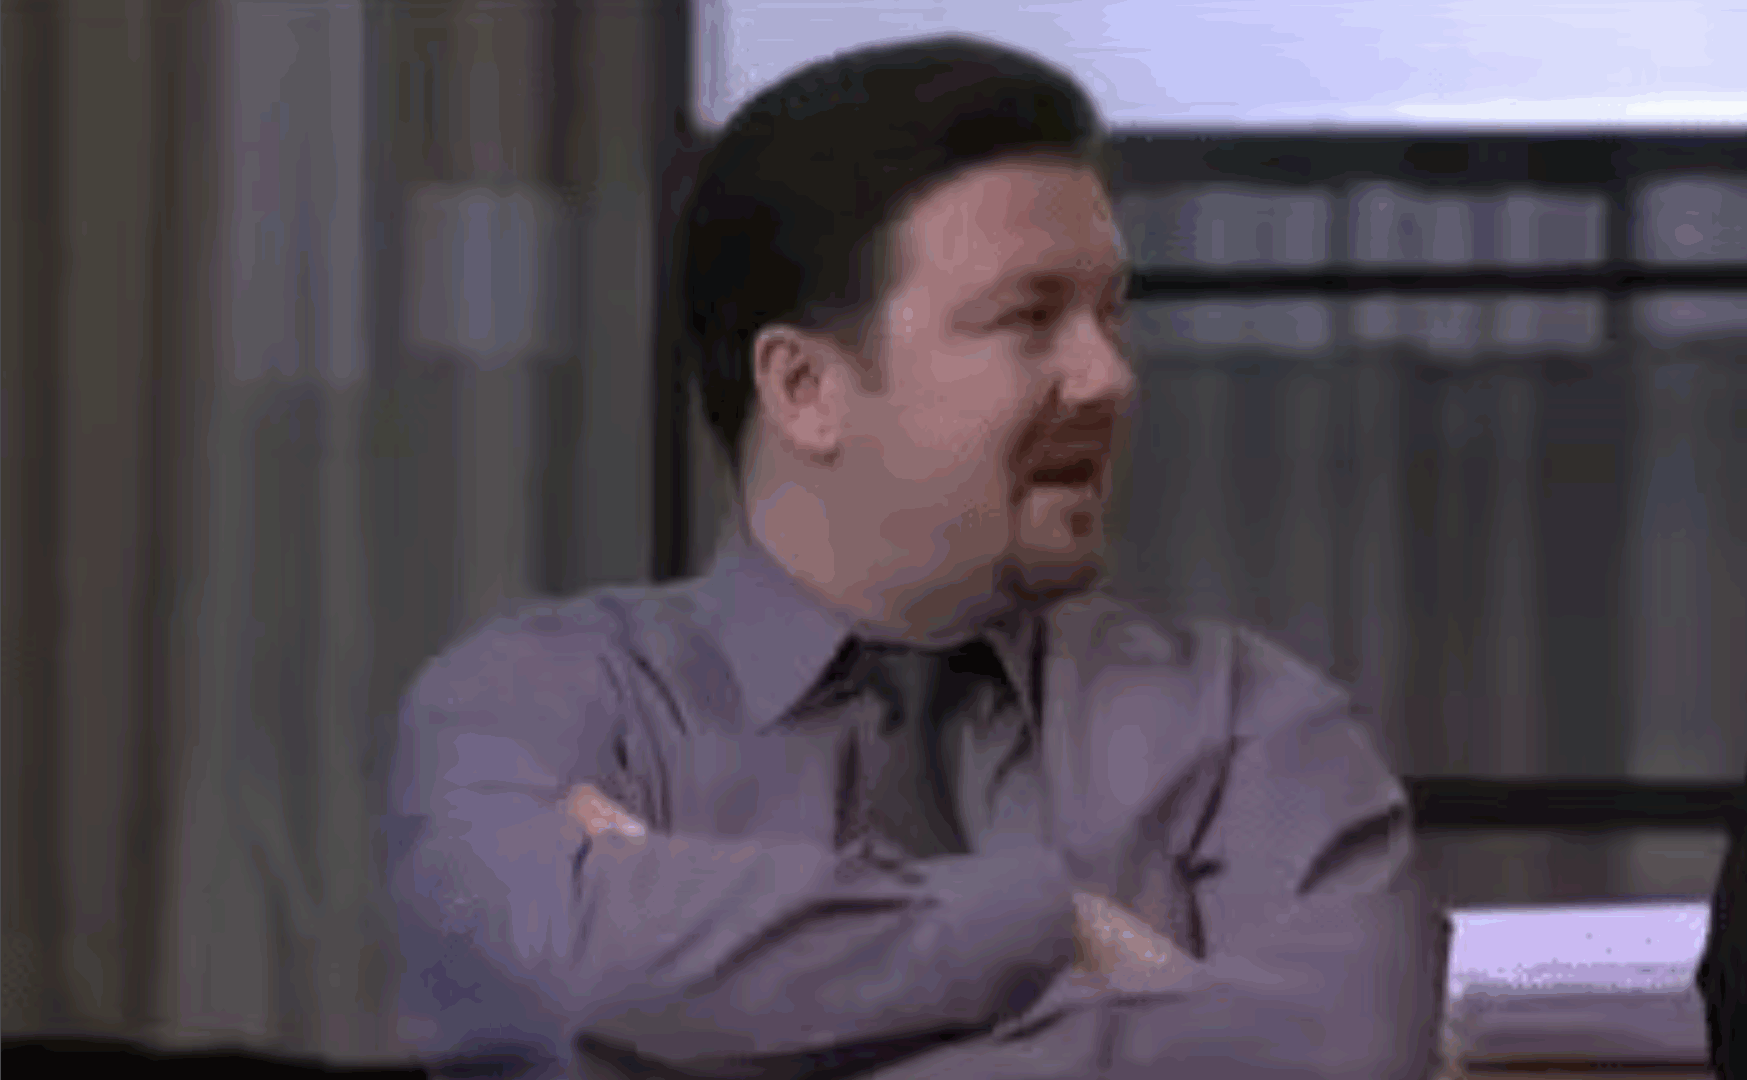 How to use GIFs in Slack example 1 - David Brent